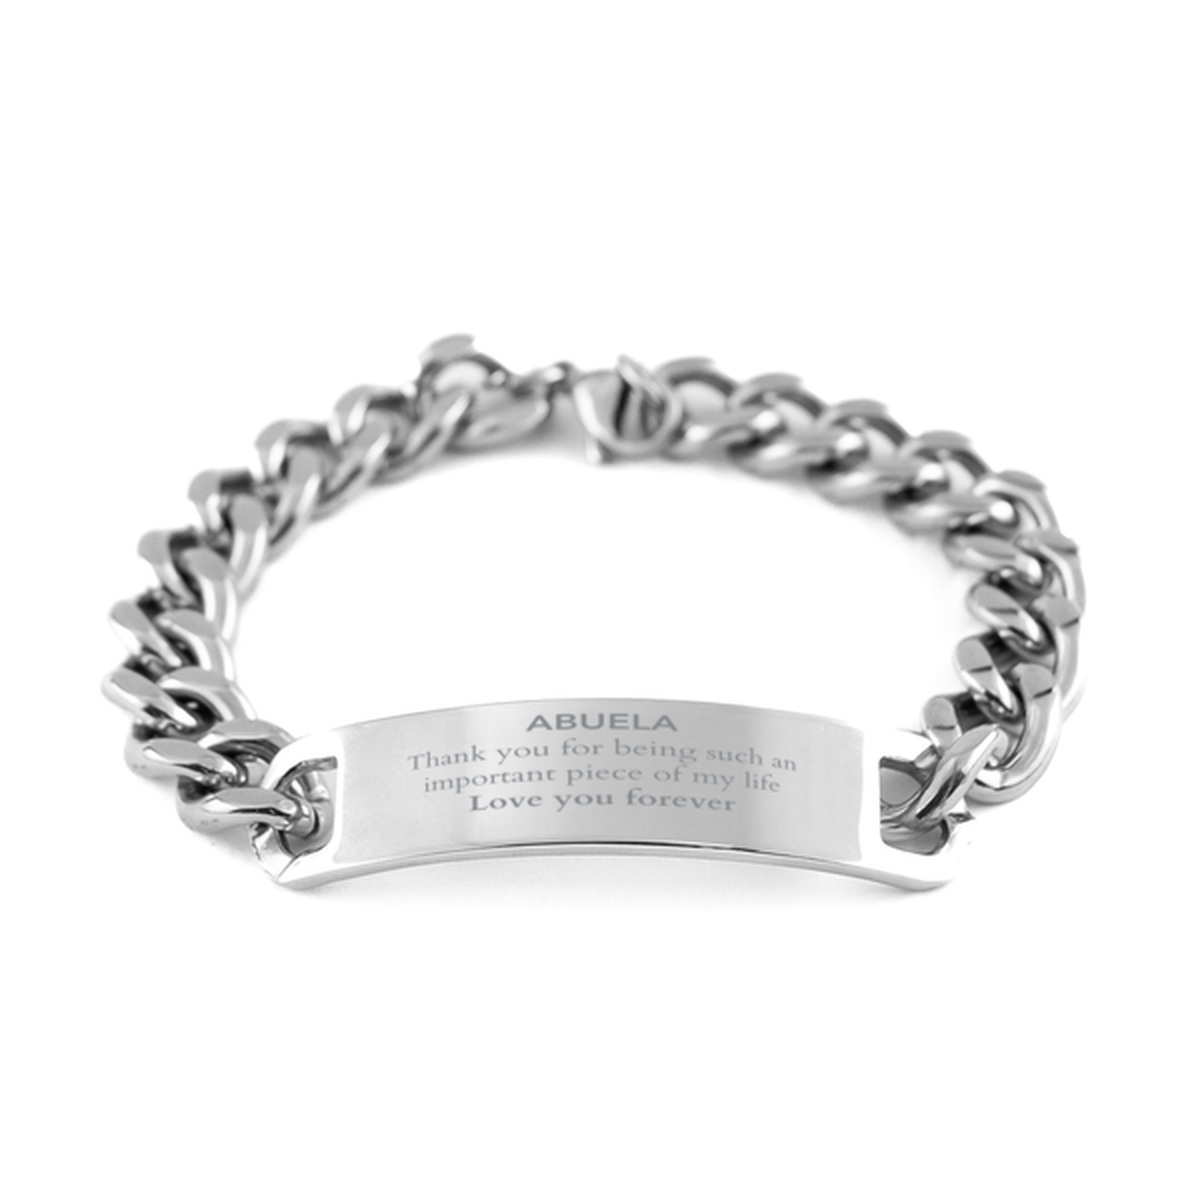 Appropriate Abuela Cuban Chain Stainless Steel Bracelet Epic Birthday Gifts for Abuela Thank you for being such an important piece of my life Abuela Christmas Mothers Fathers Day